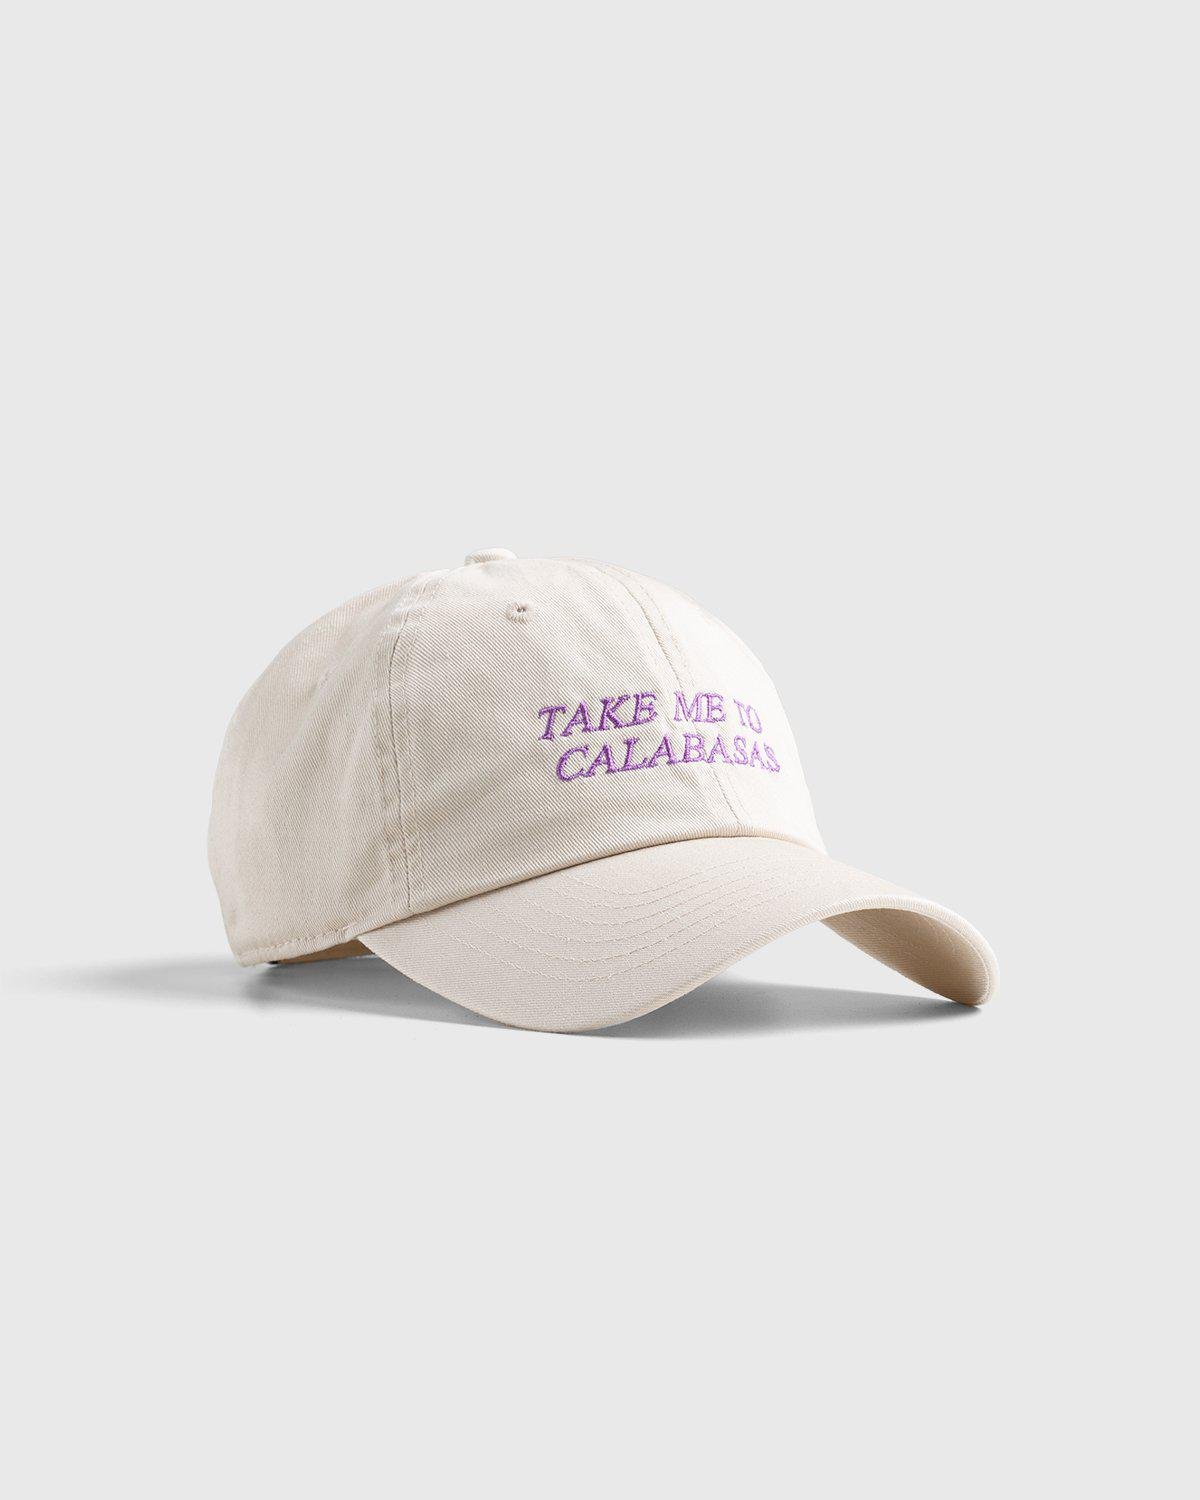 HO HO COCOTake Me to Calabasas Cap Beige by HIGHSNOBIETY